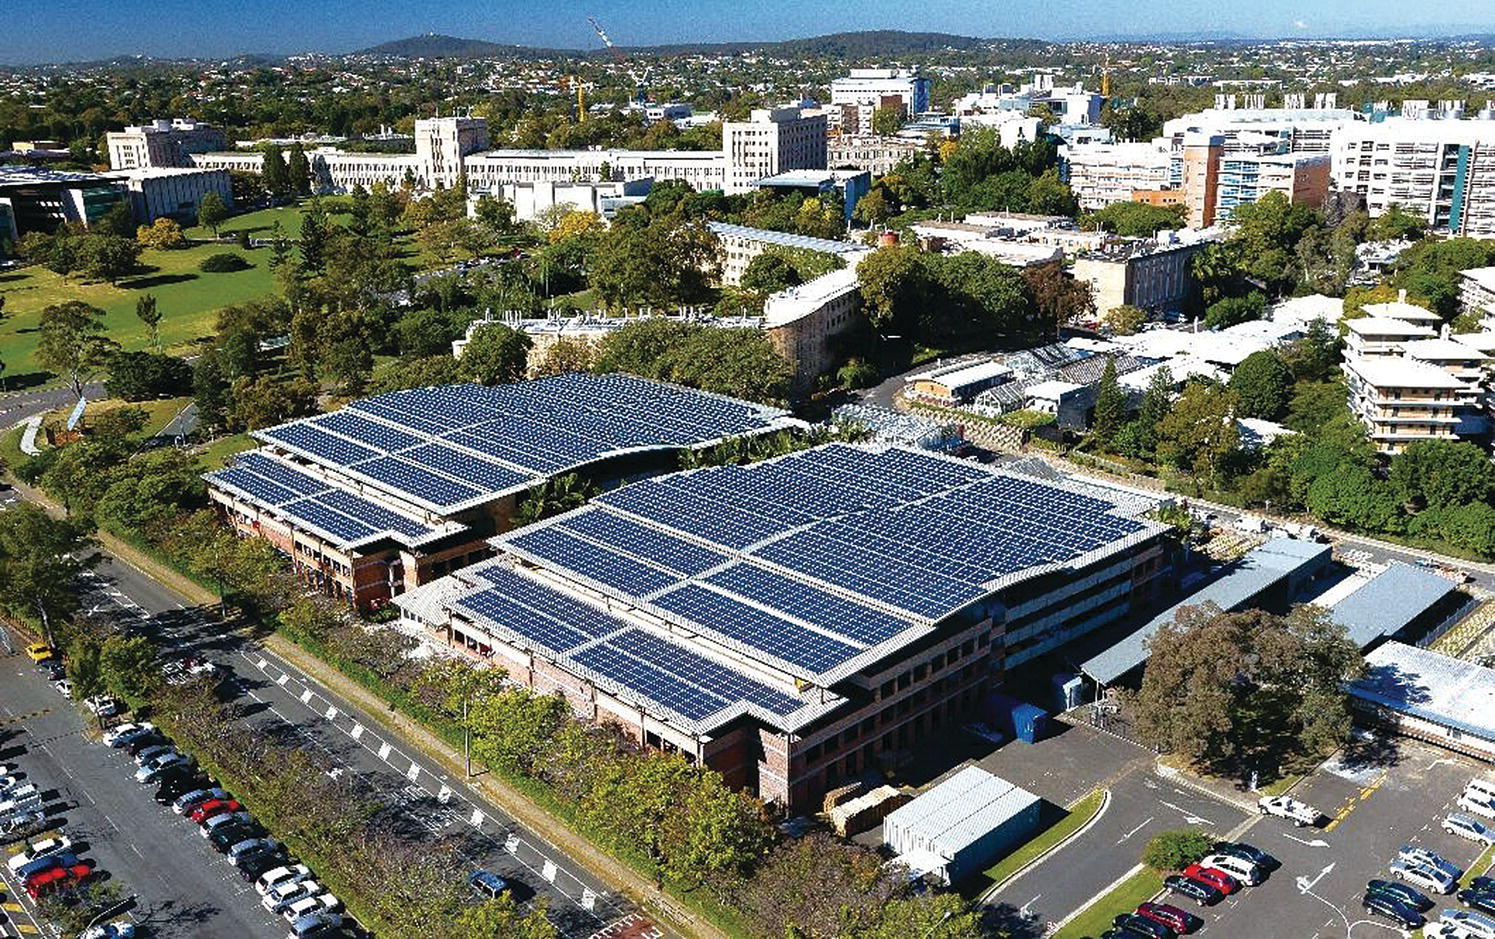 Aerial view of the 1.2 MW PV rooftop system at the University of Queensland, Australia.